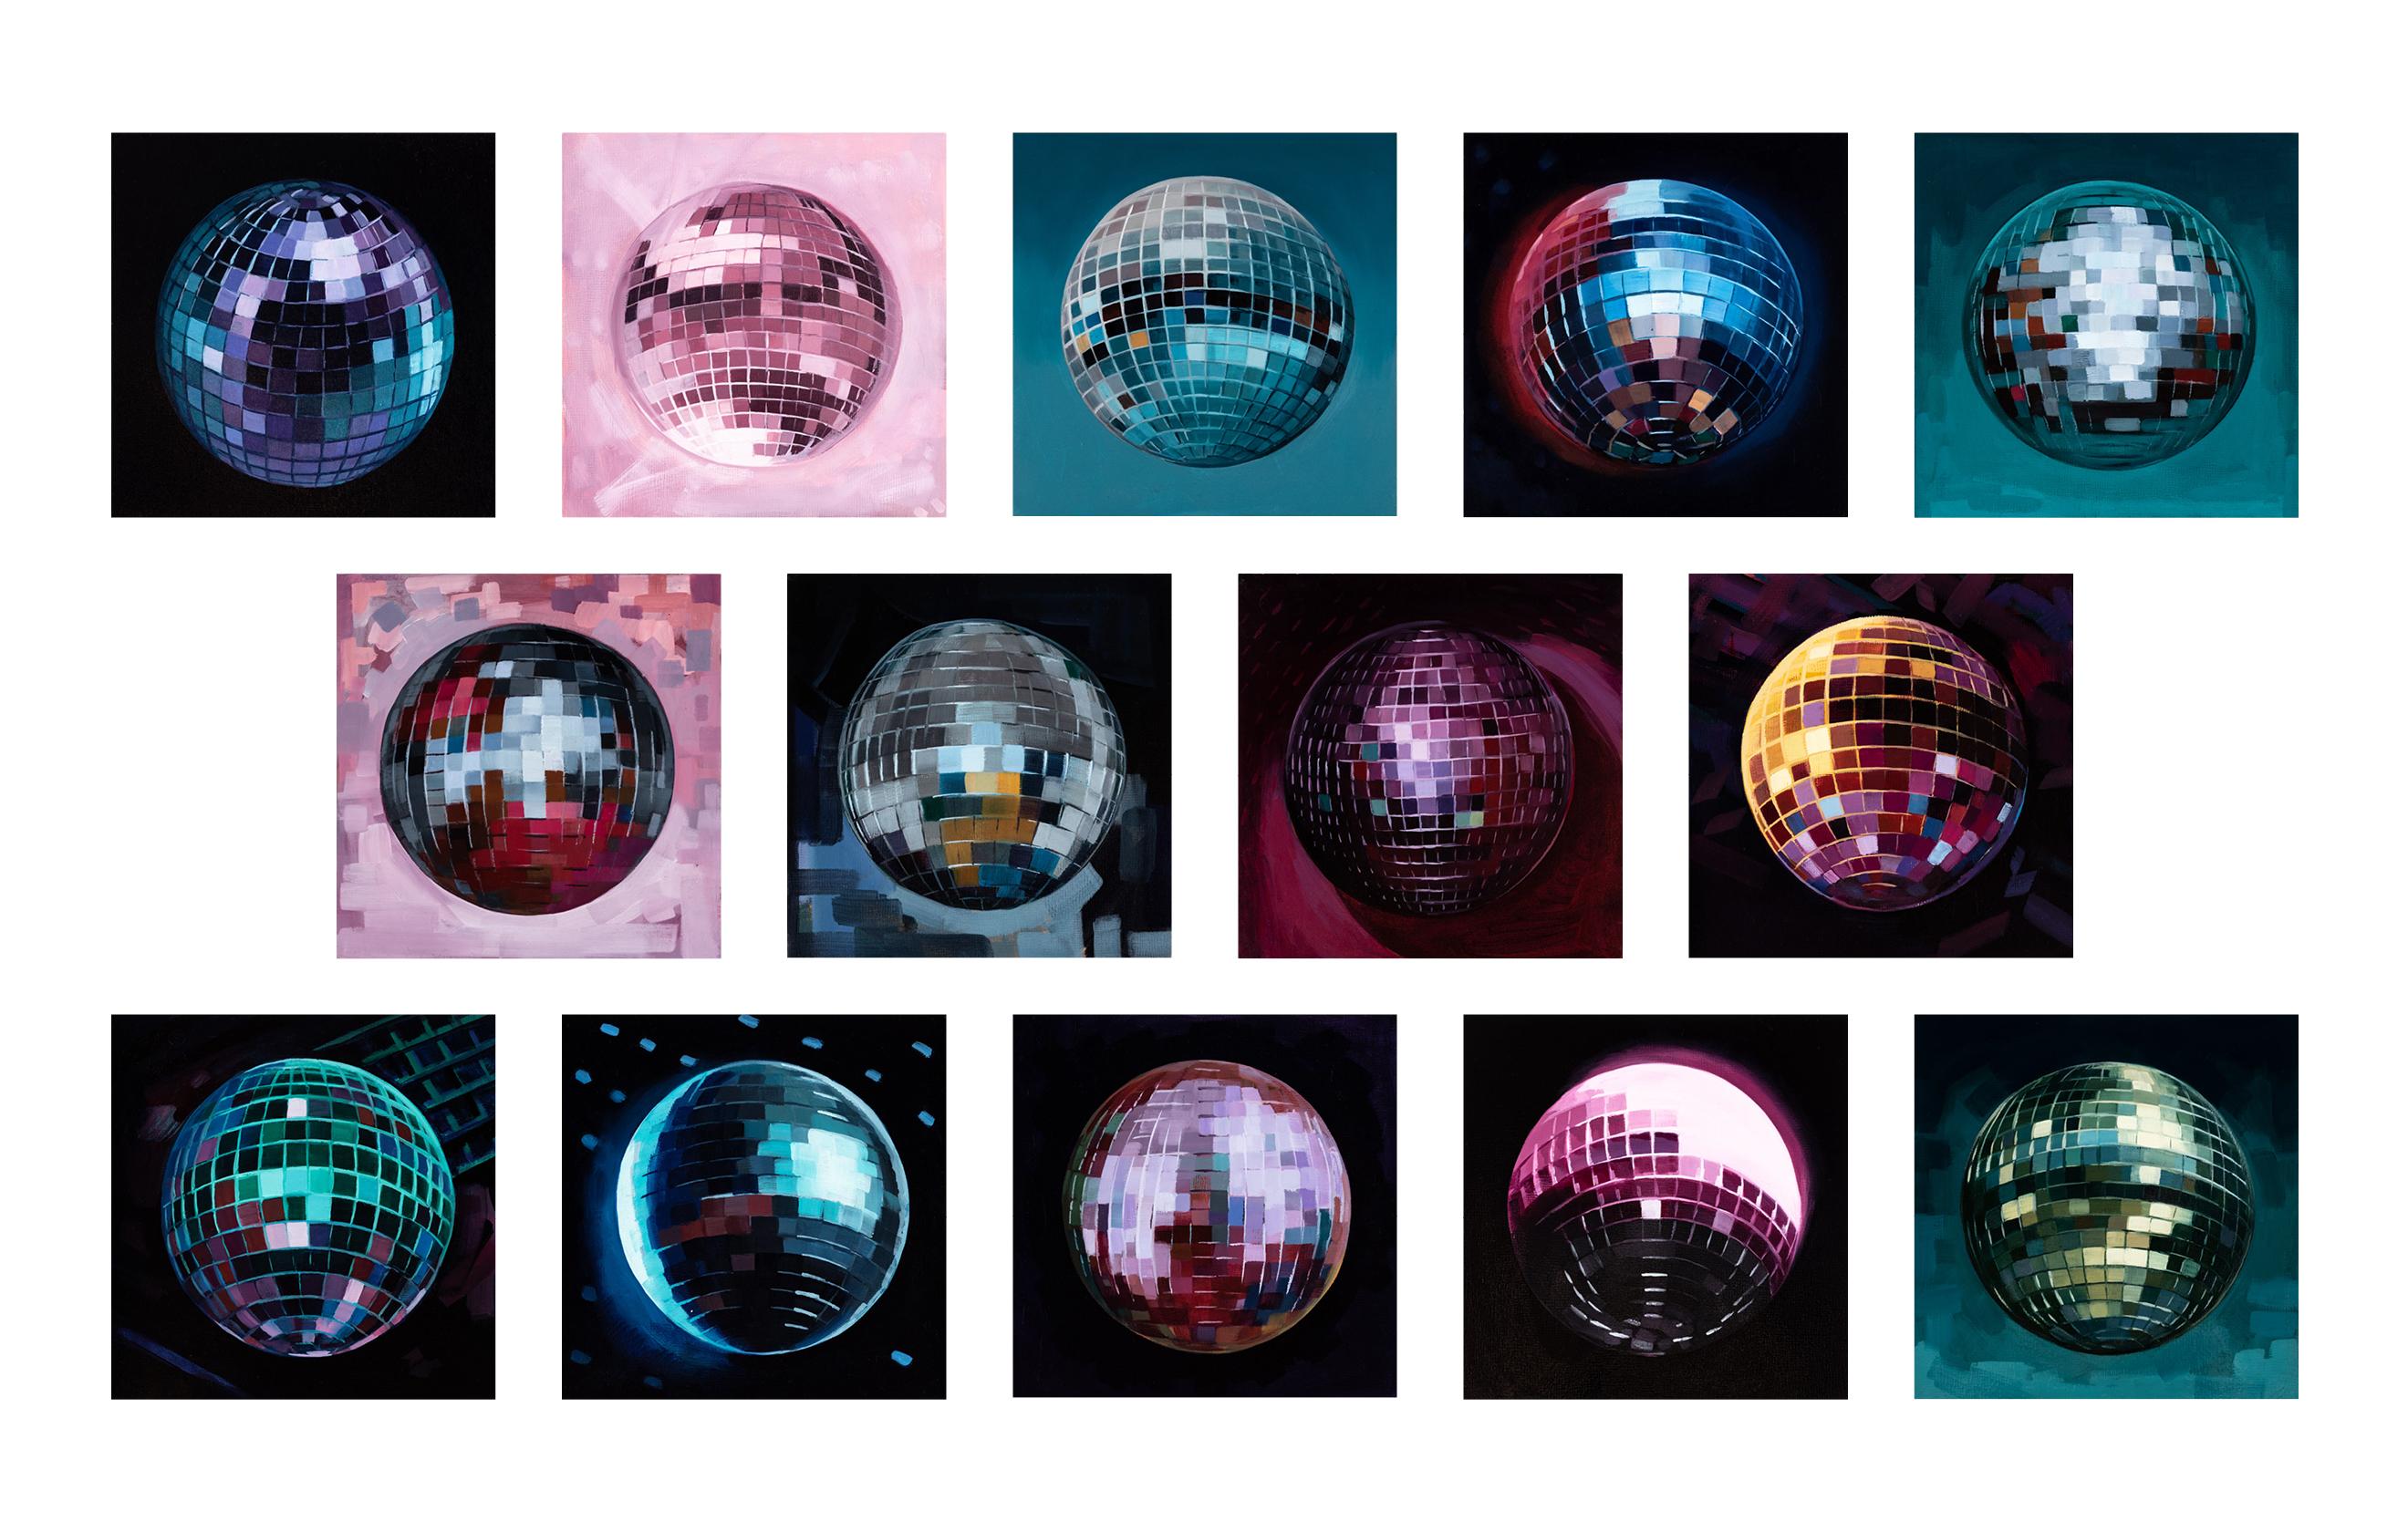 Artist Katherine Fraser's "Disco Ball" series consists of 14 separate 8in x 8in oil paintings by the artist. All are pictured together in the first image. This listing is for the full collection of 14 paintings. 

This series marks a more colorful,